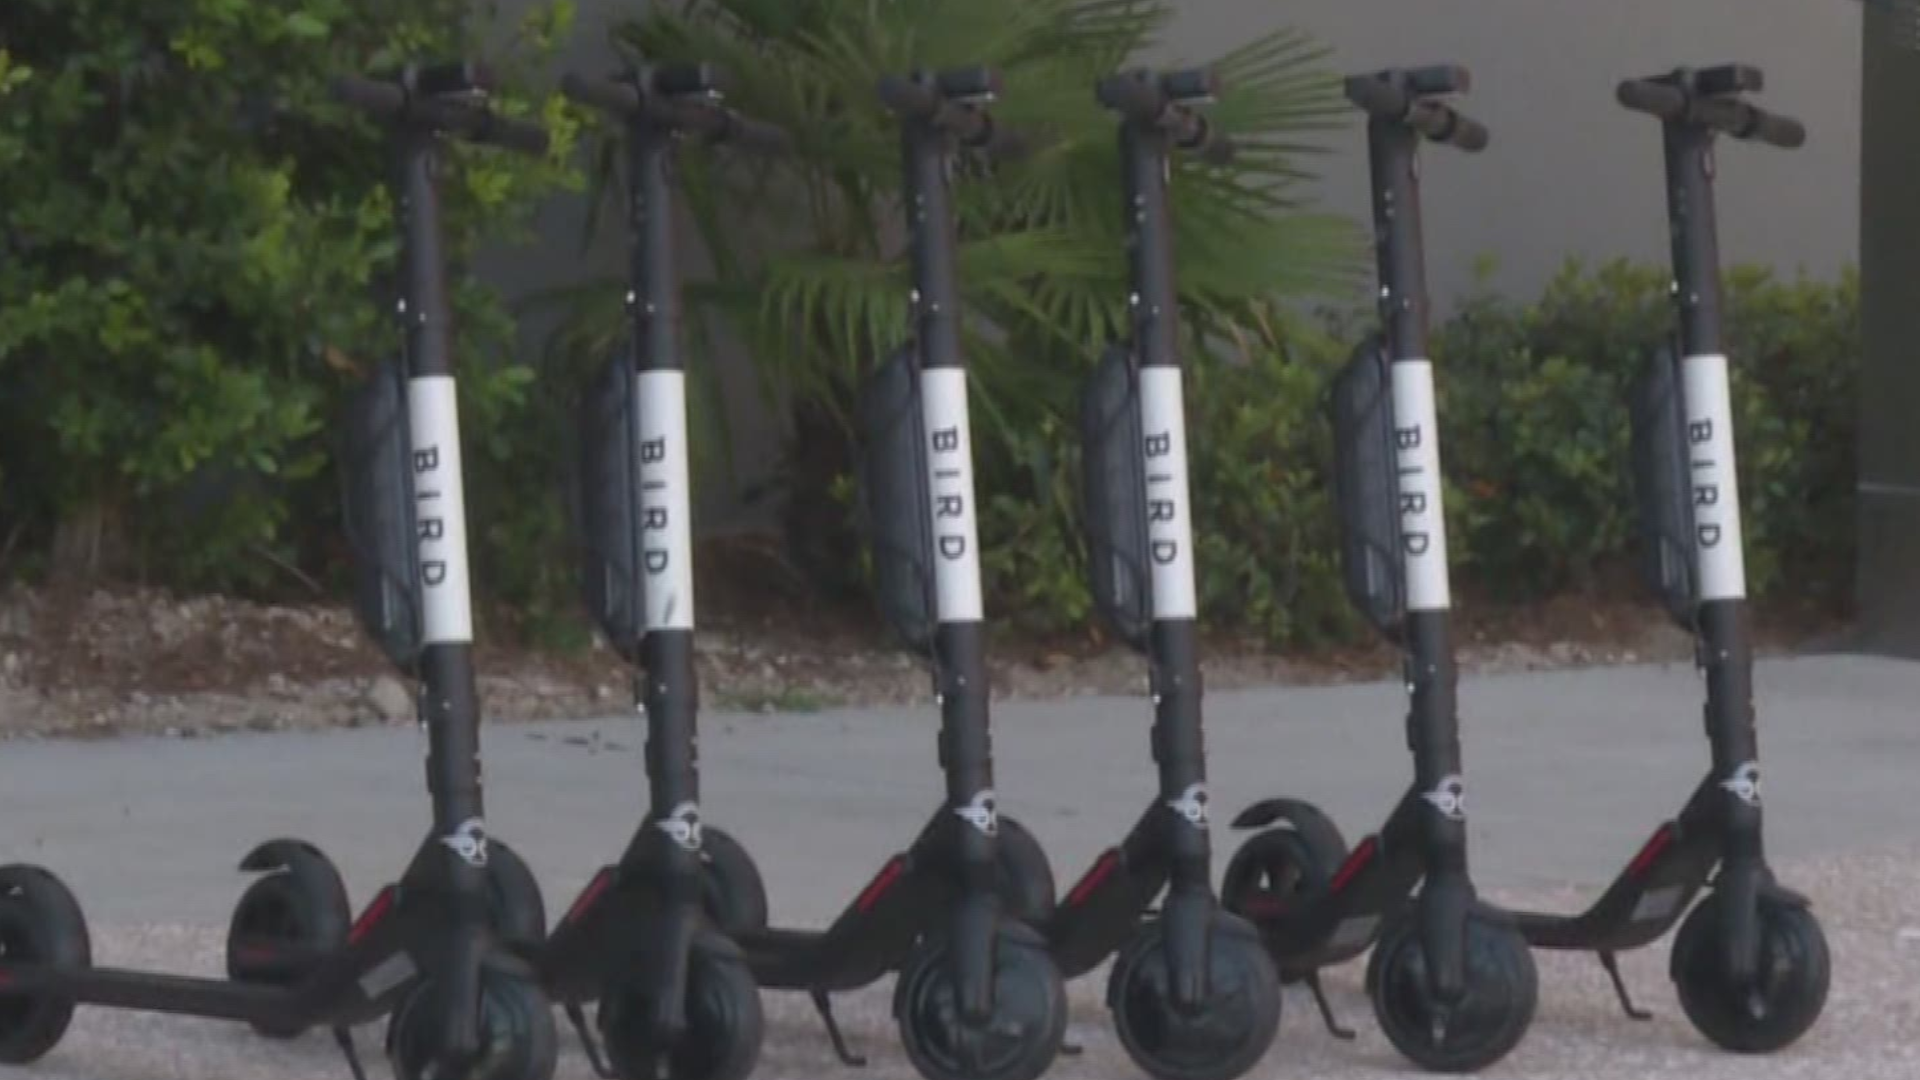 The city of Tampa launched its electric scooter pilot program over the weekend. City officials had postponed the launch of the pilot program several times. https://on.wtsp.com/2I1uBJo